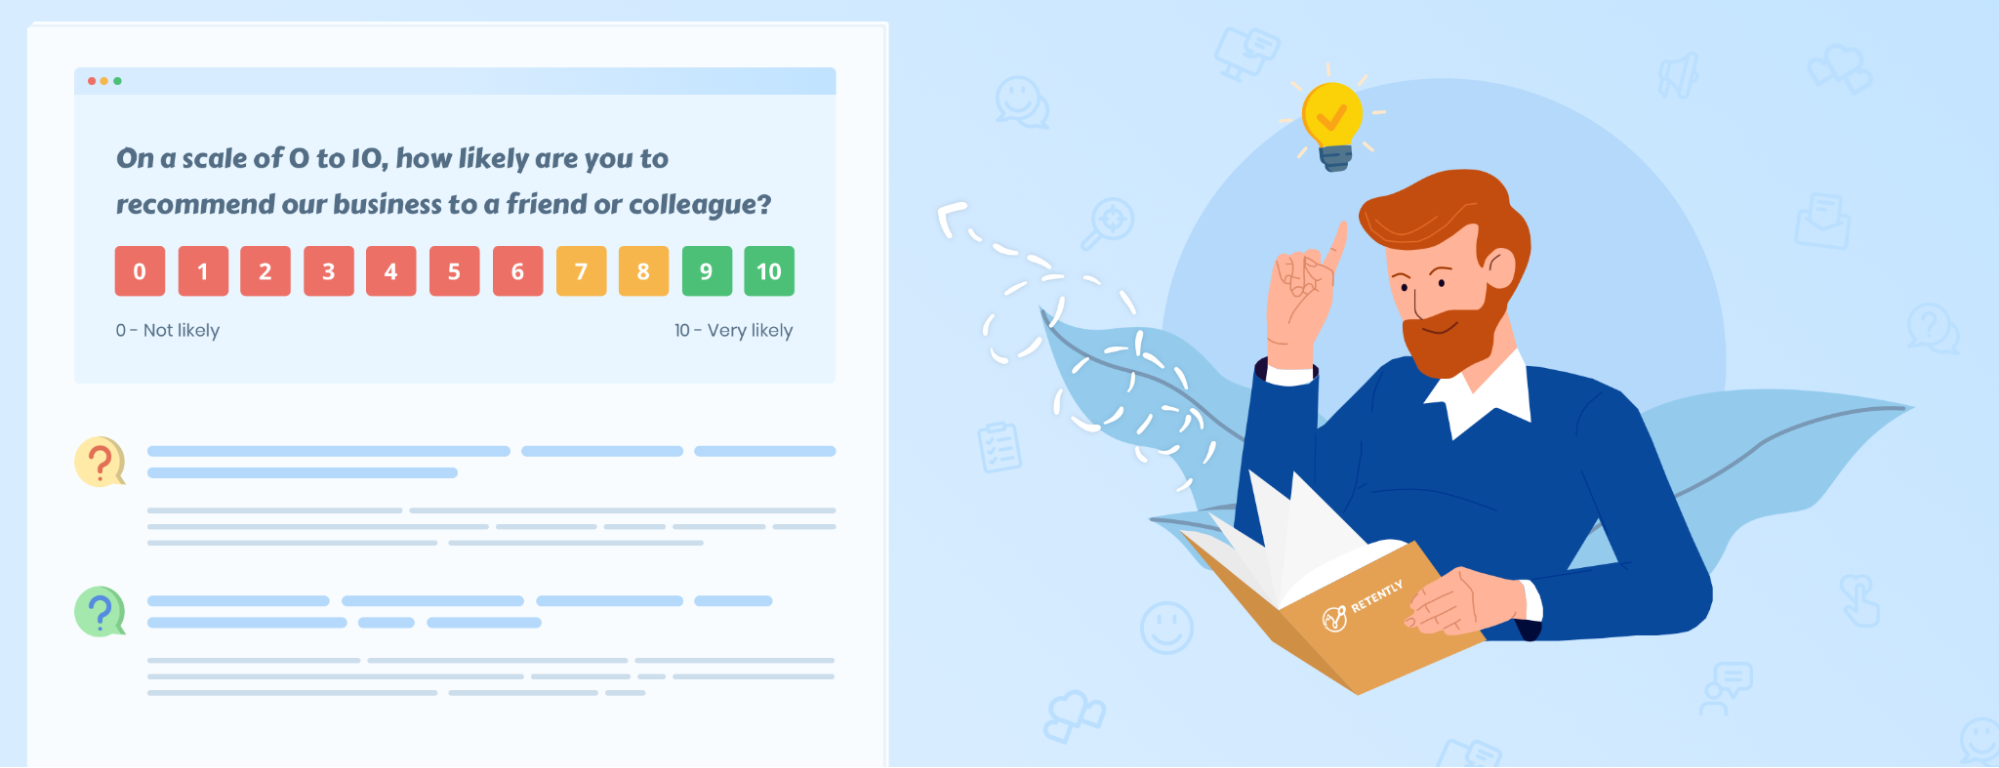 20 NPS Survey Question and Response Templates for 2022